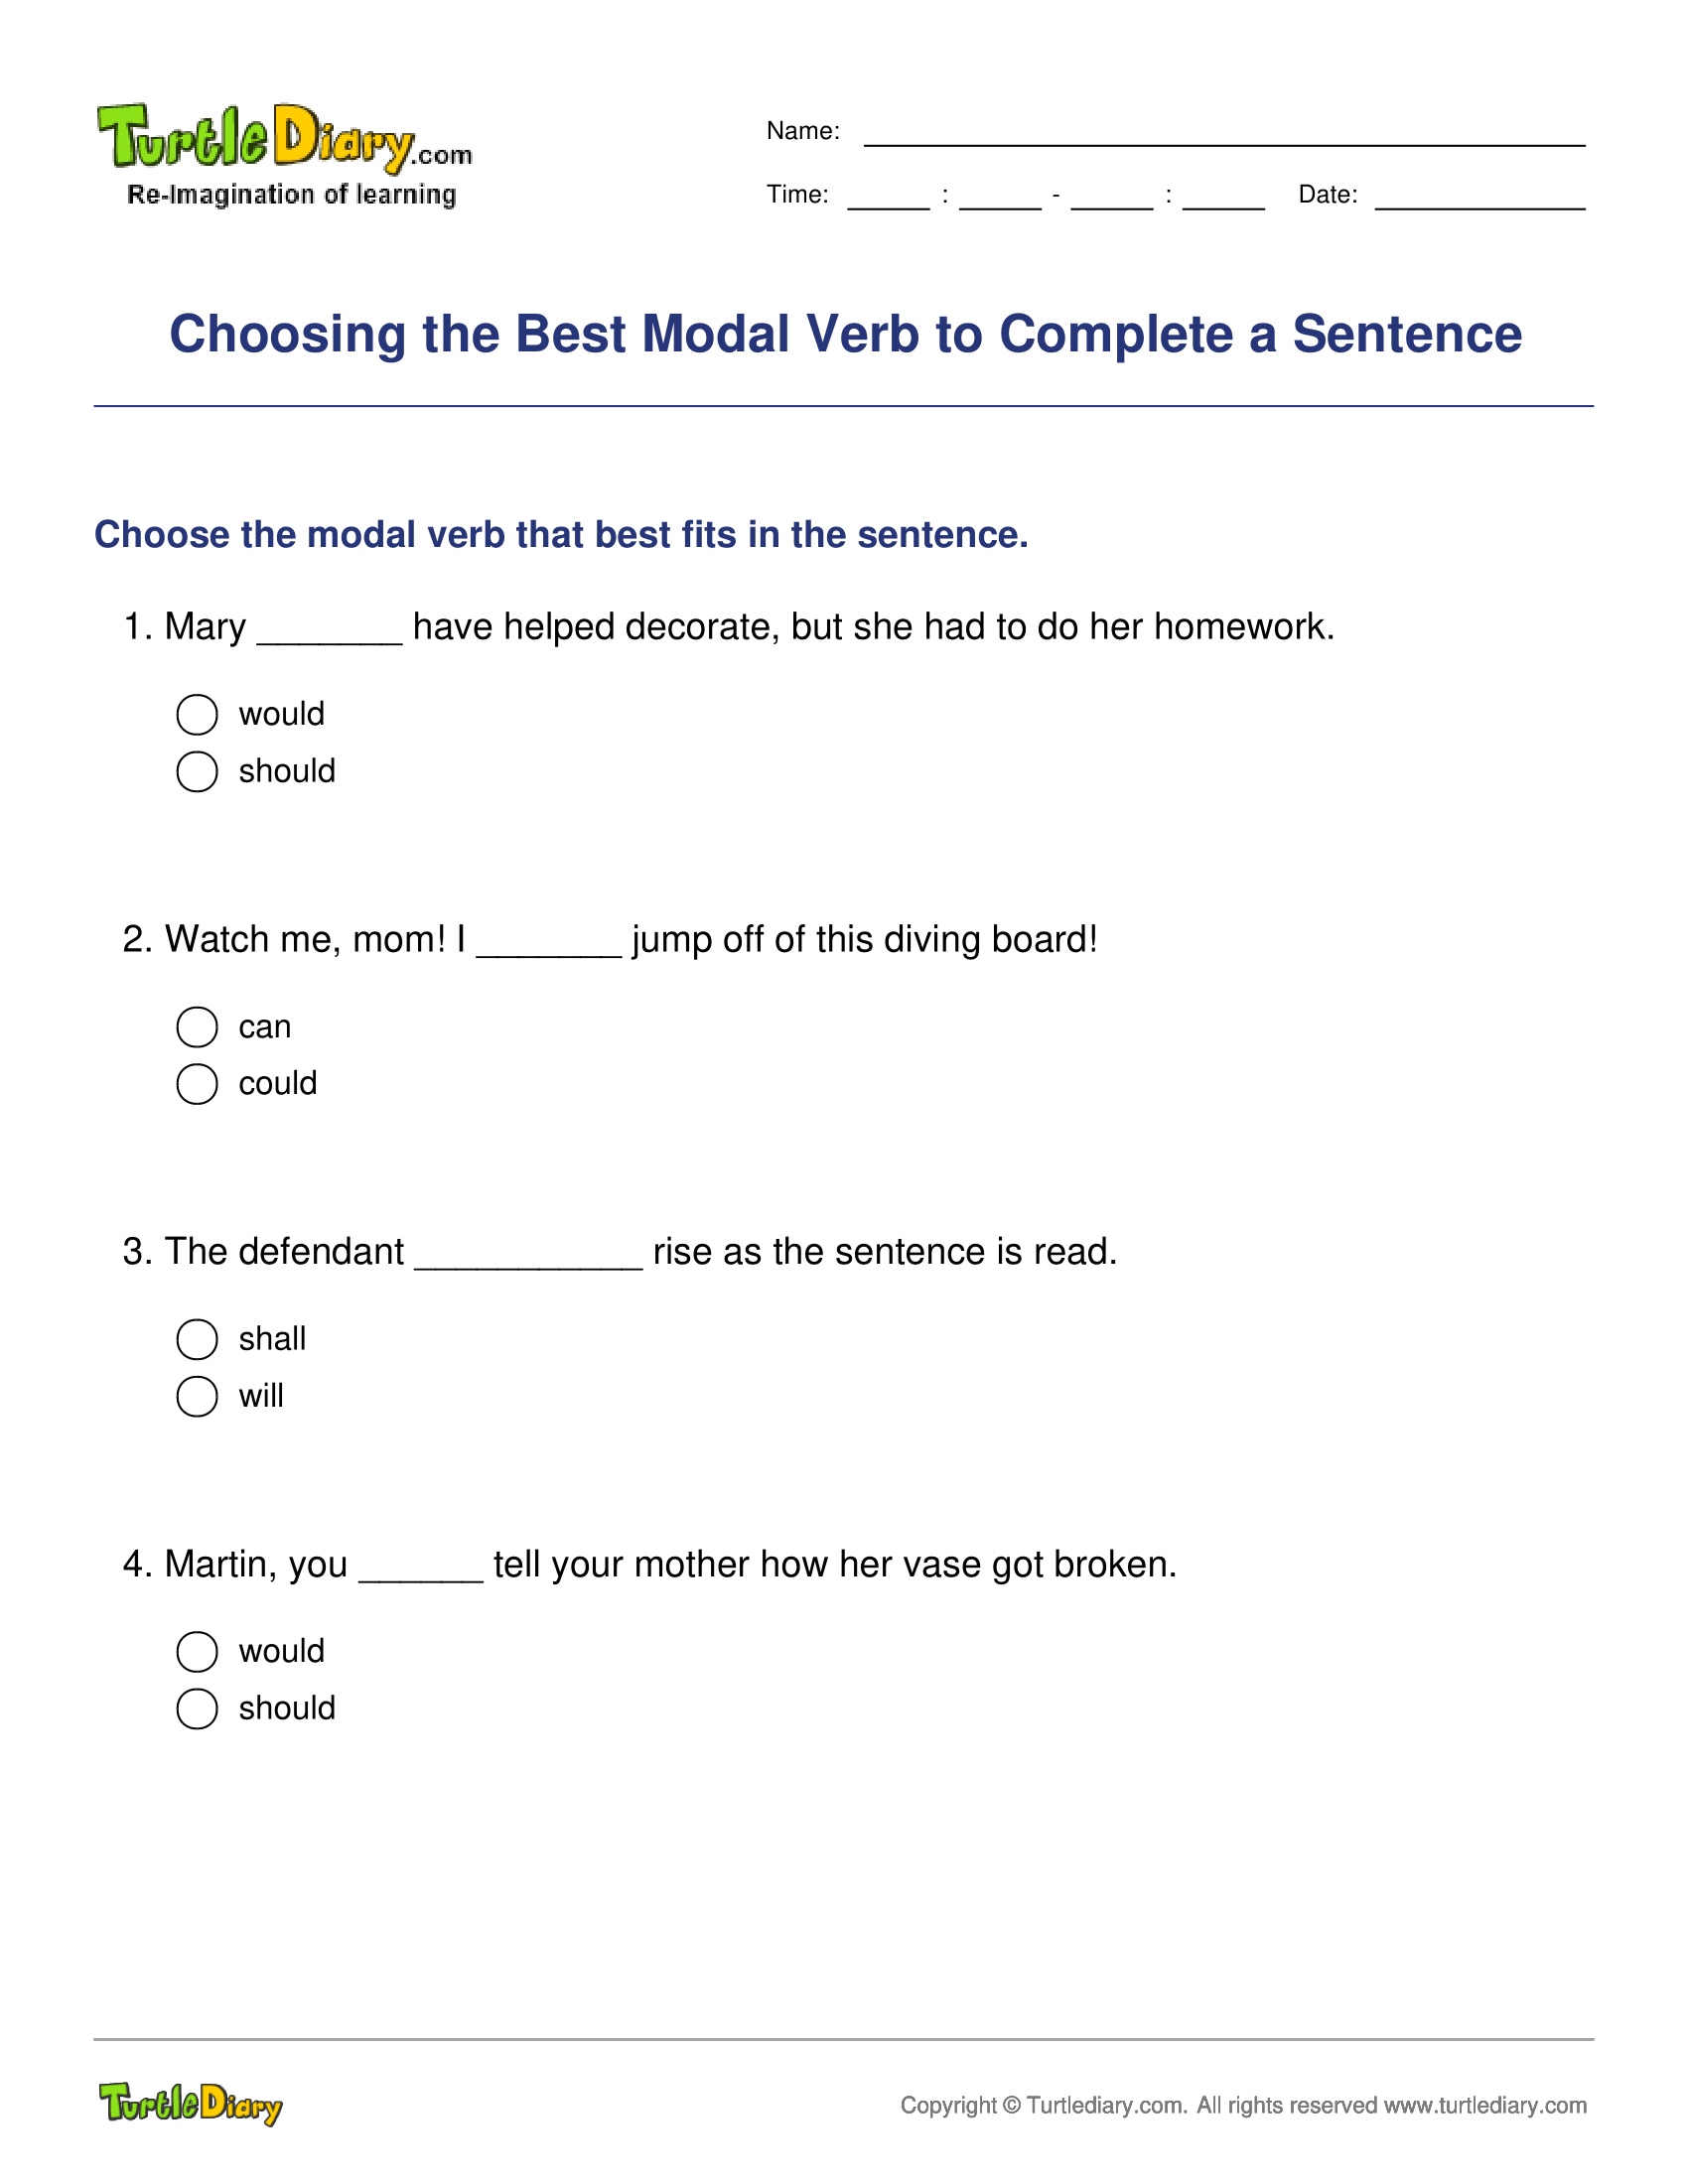 Choosing the Best Modal Verb to Complete a Sentence